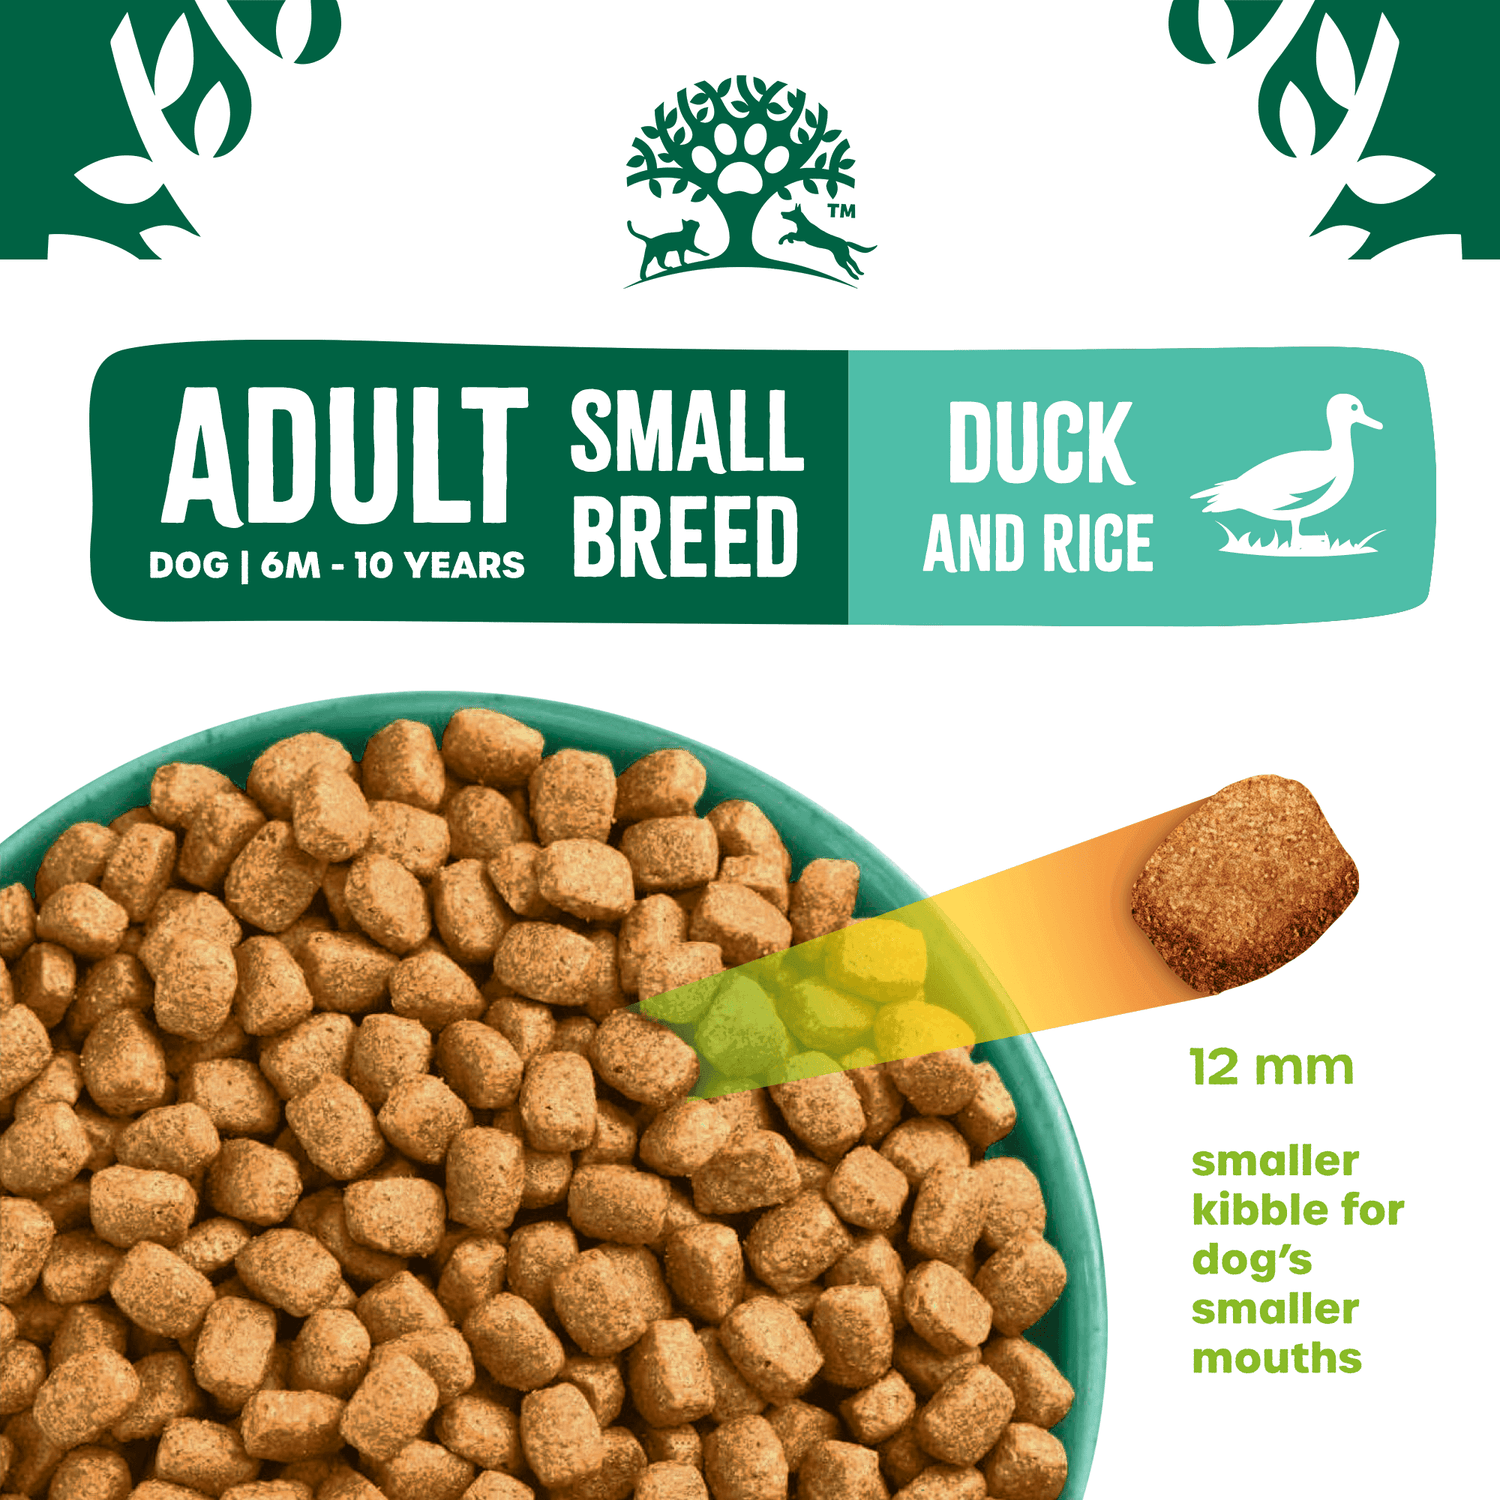 Adult Small Breed Duck & Rice Dry Dog Food - James Wellbeloved UK